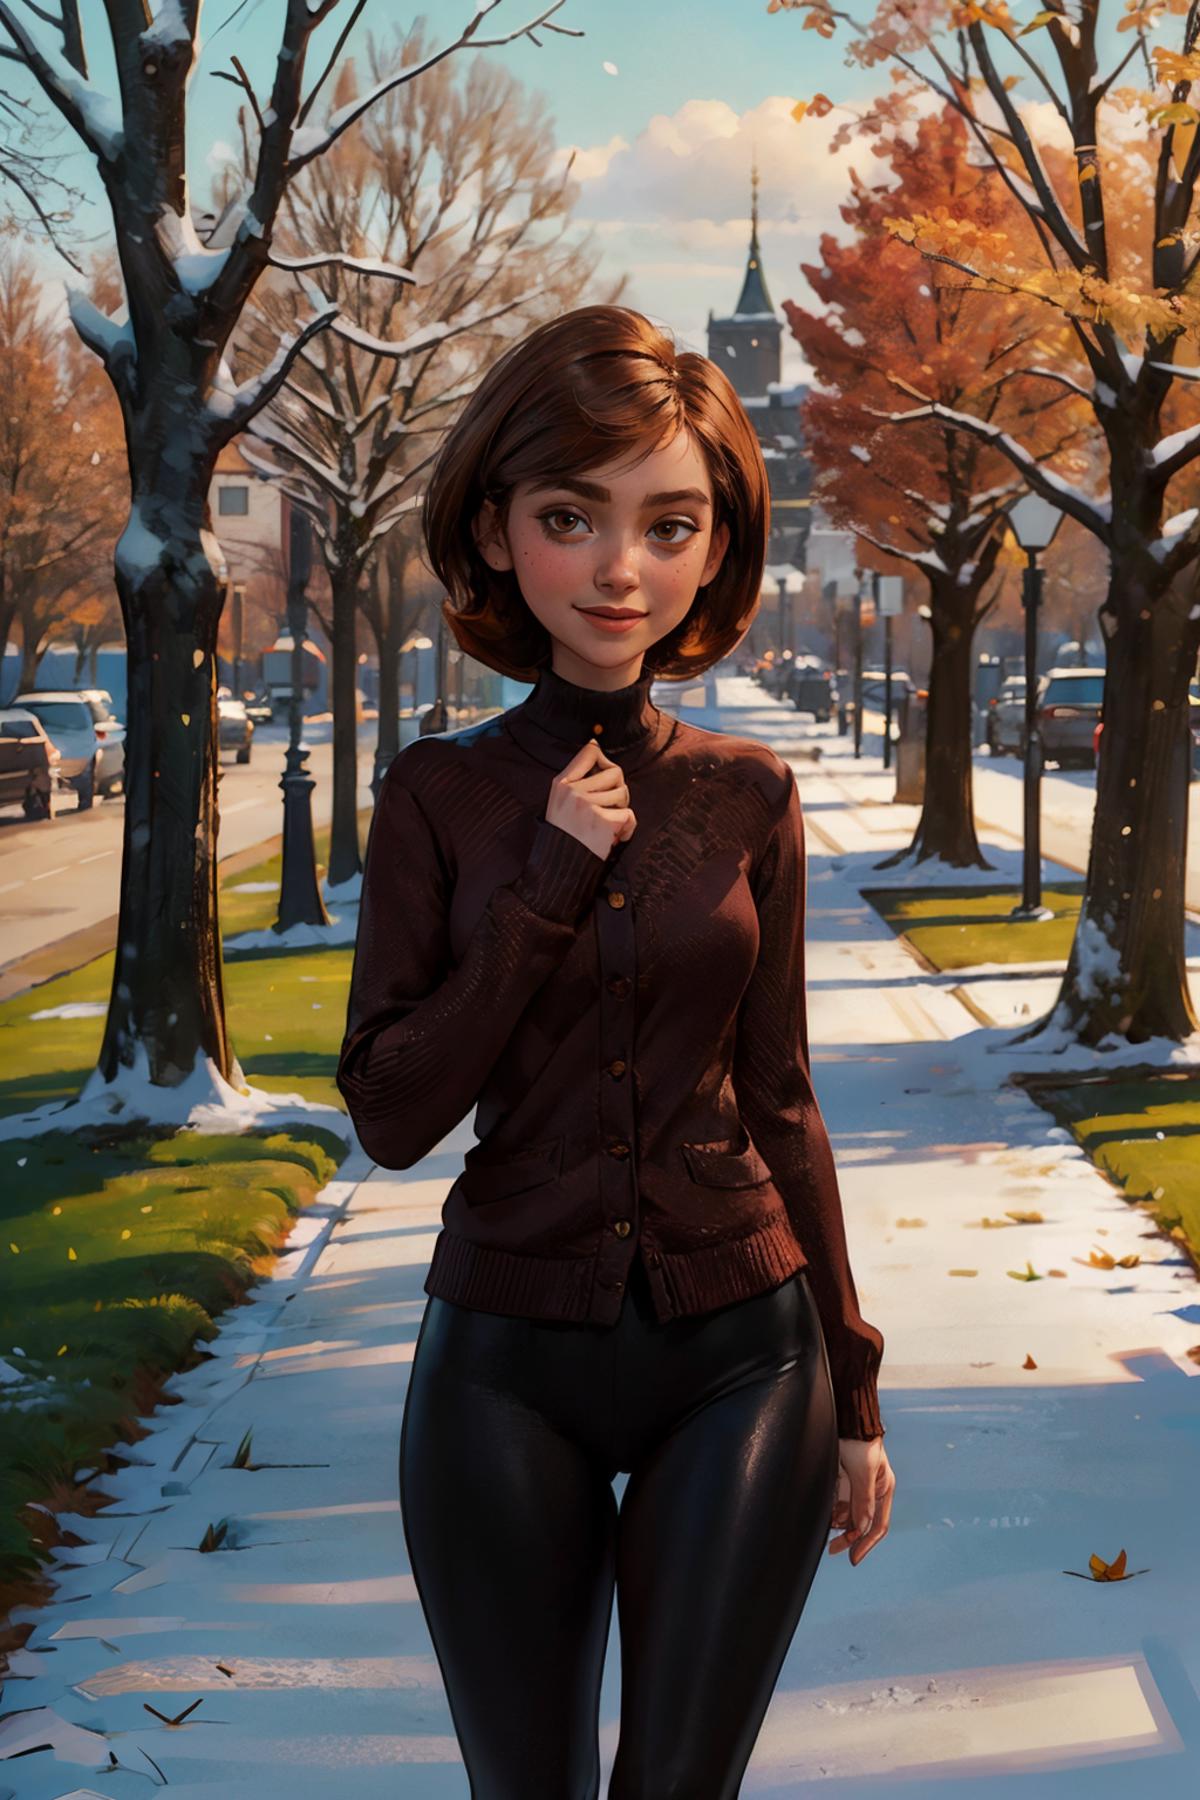 Helen Parr - The Incredibles - Character LORA image by wikkitikki